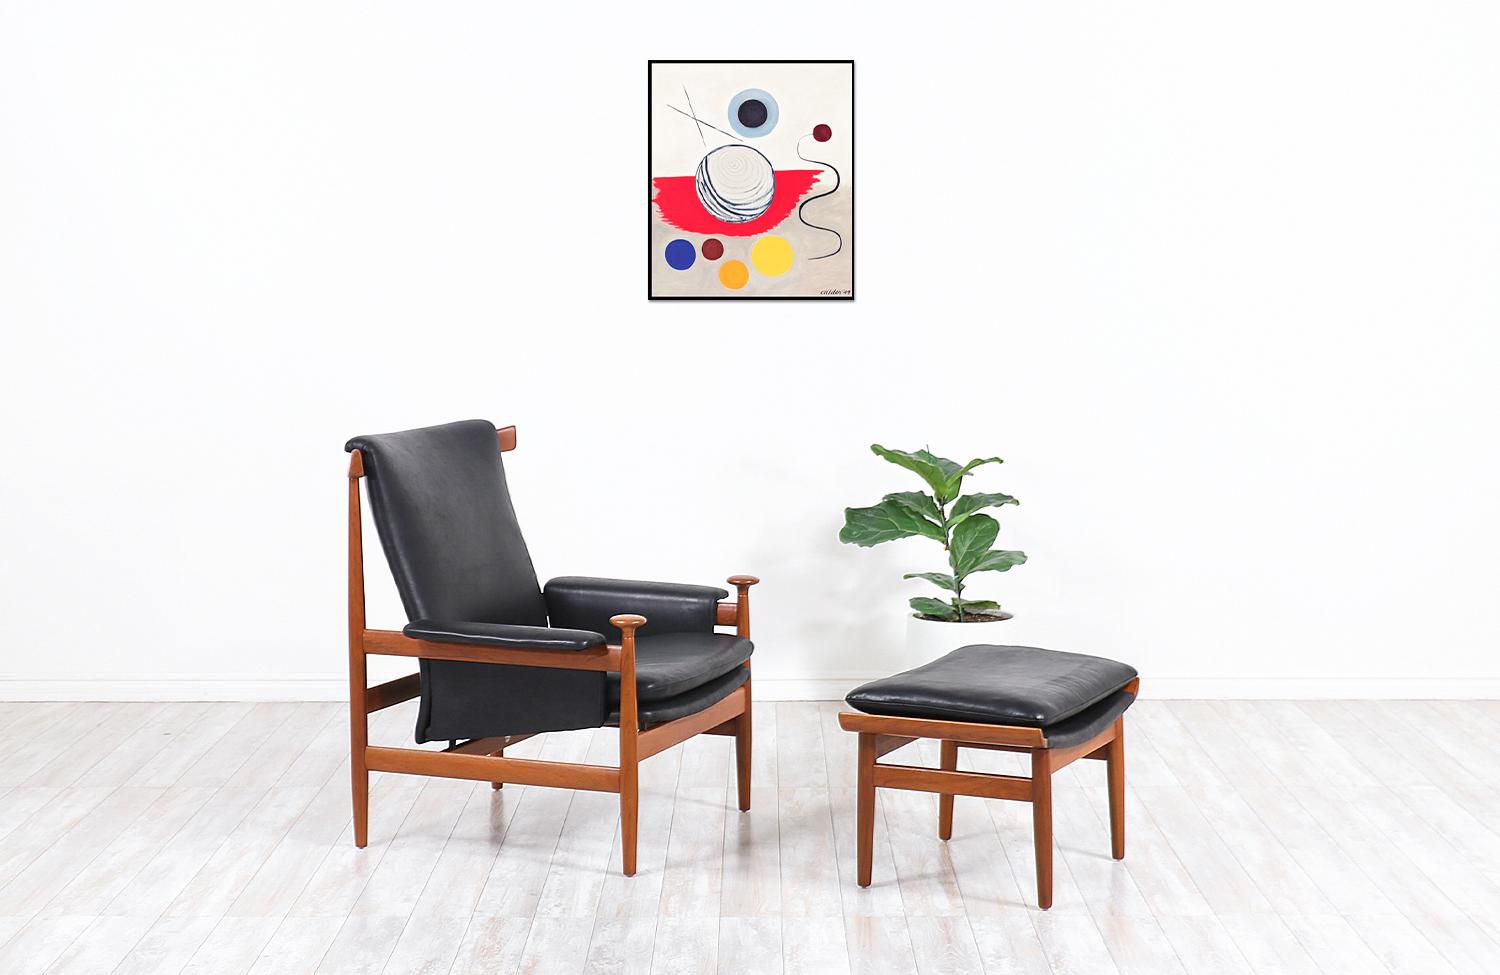 One of the most iconic Danish chairs is the “Bwana” chair and its ottoman designed by Finn Juhl for France & Son in Denmark in 1962. Originally designed as an updated version of the 